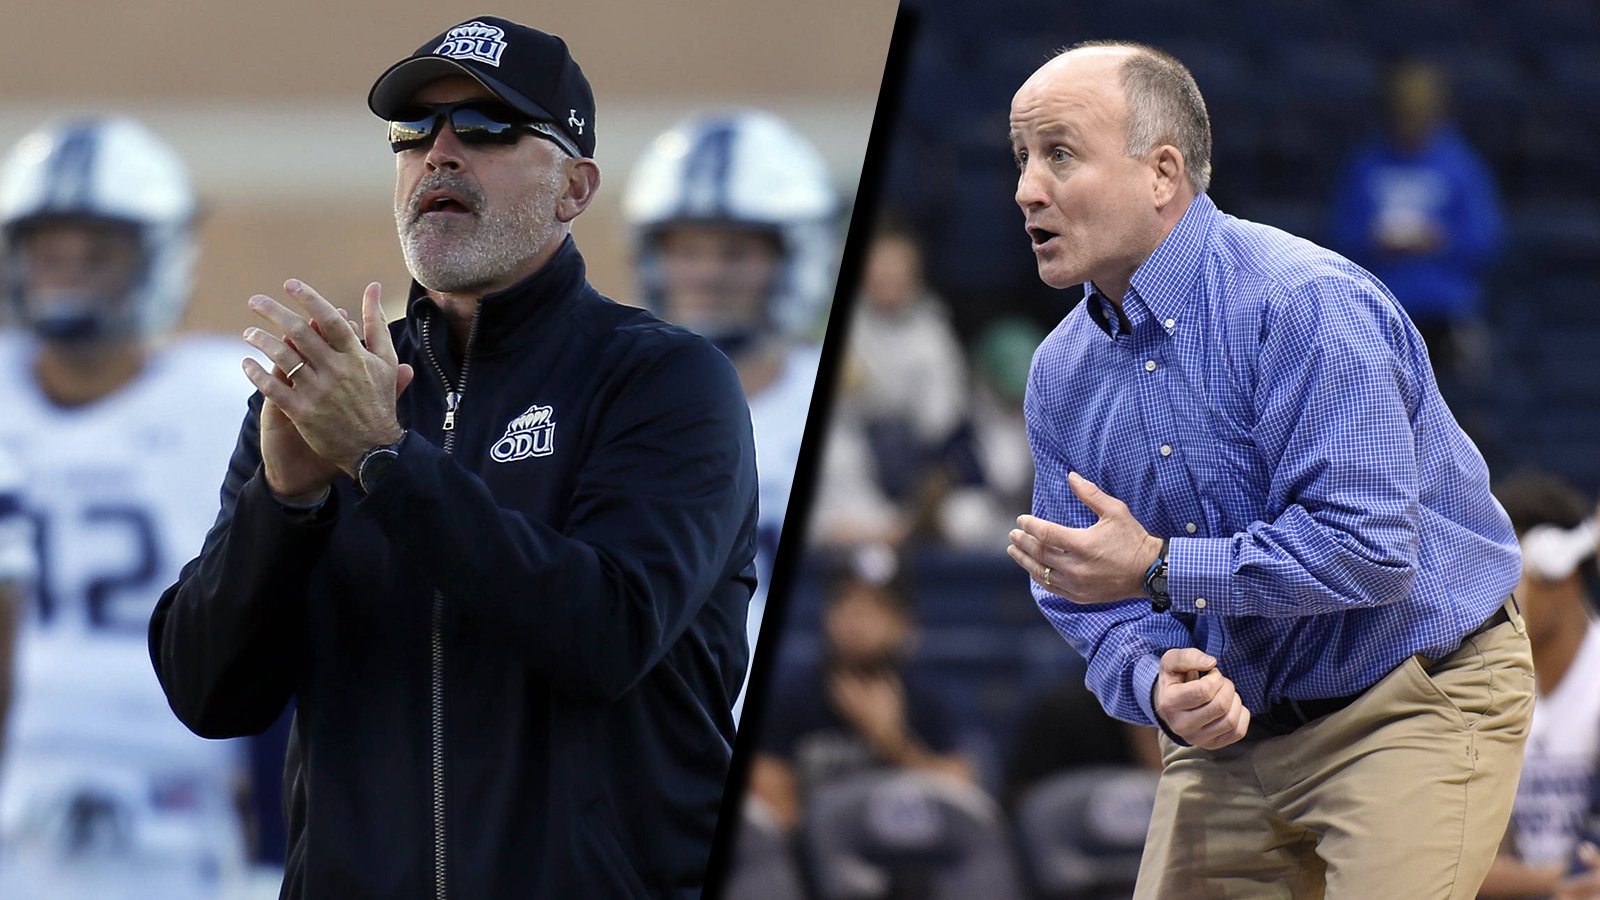 Happy birthday to two of the best coaches here at ODU, Bobby Wilder and Steve Martin! | 